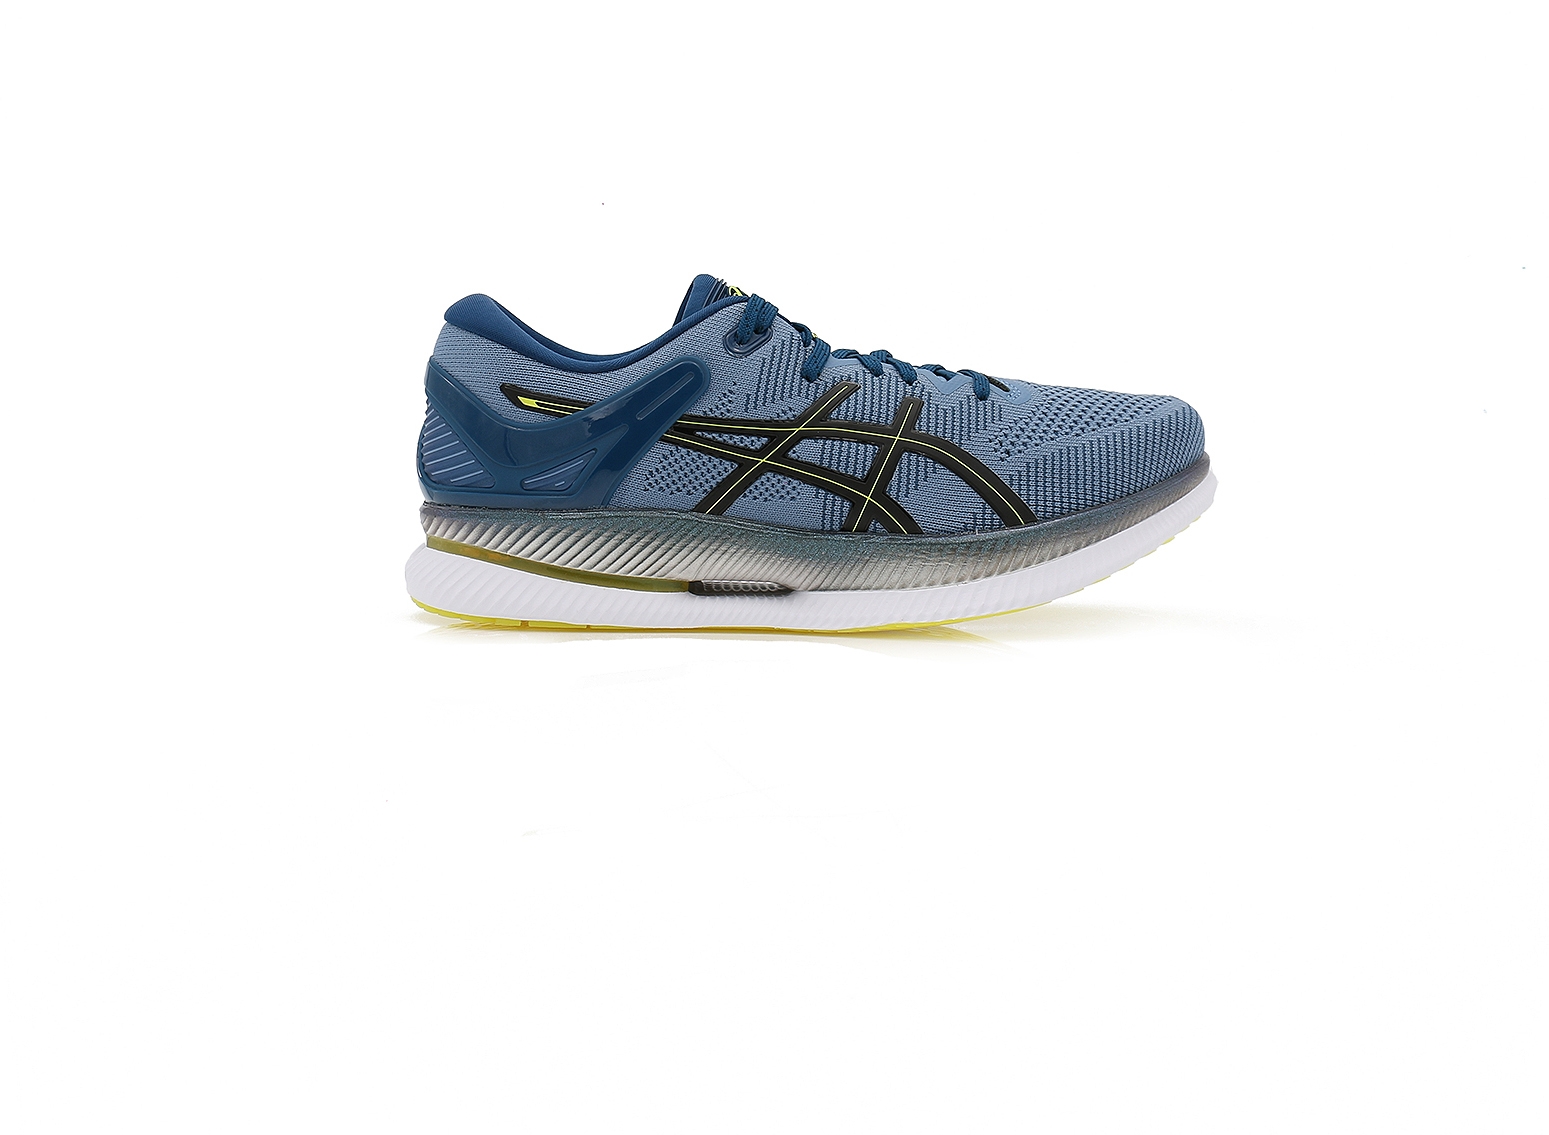 Womens Asics Metaride – Blue Running Trainers – Lace-Up – Suitable For Achilles Pain / Bunions – Strong Heel Support – Size 4 – Synthetic Fabric